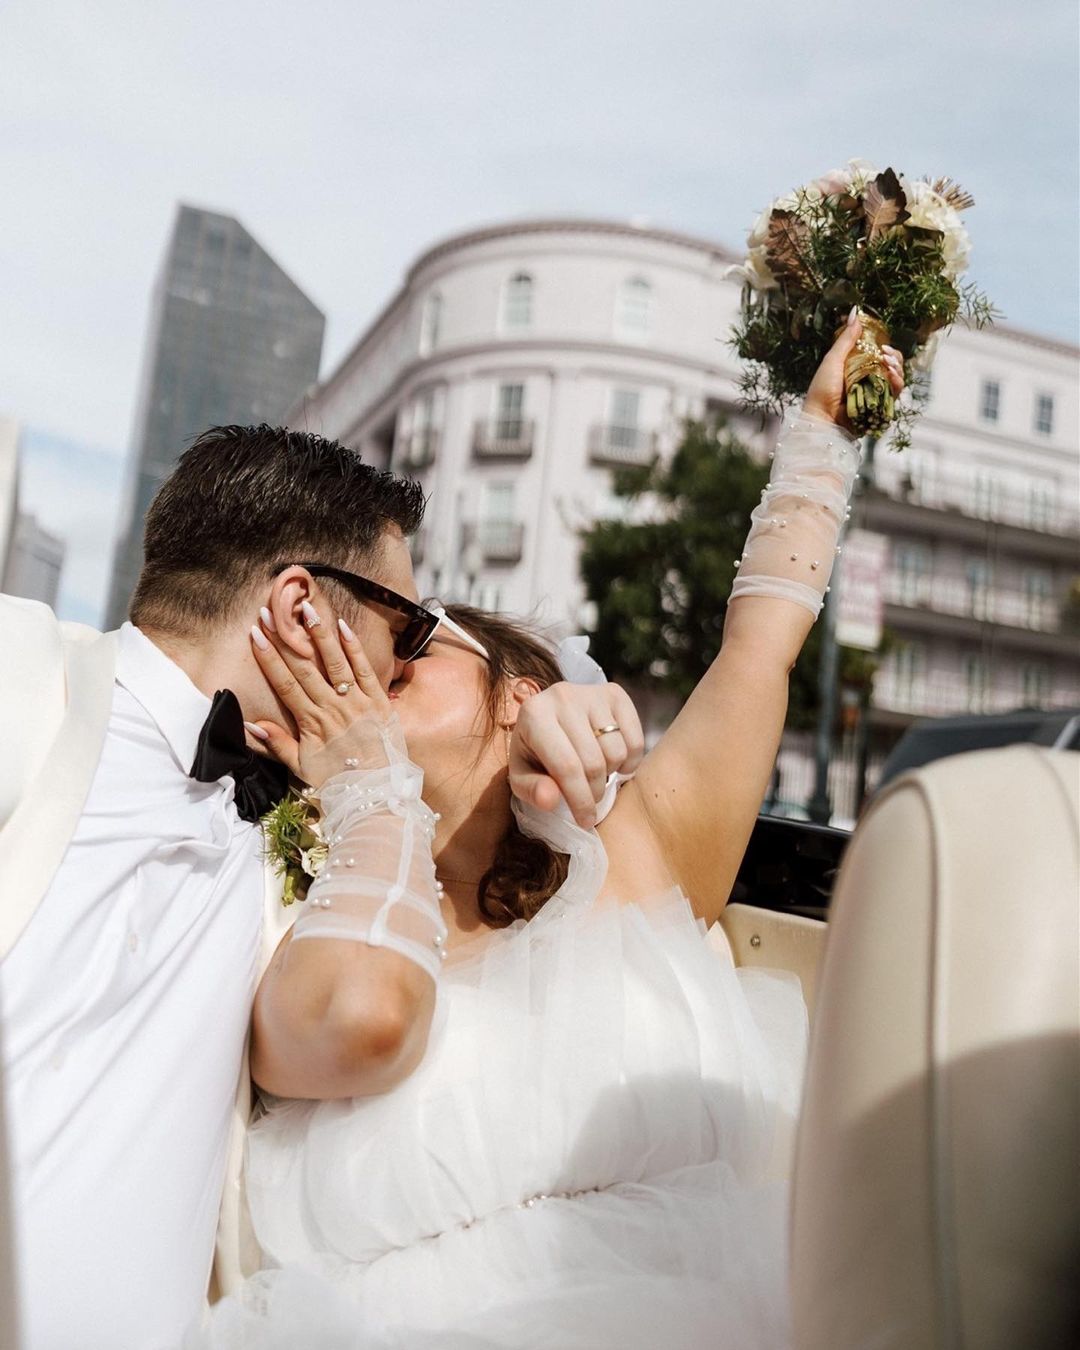 Planning an elopement or a micro-wedding" Go to New Orleans!